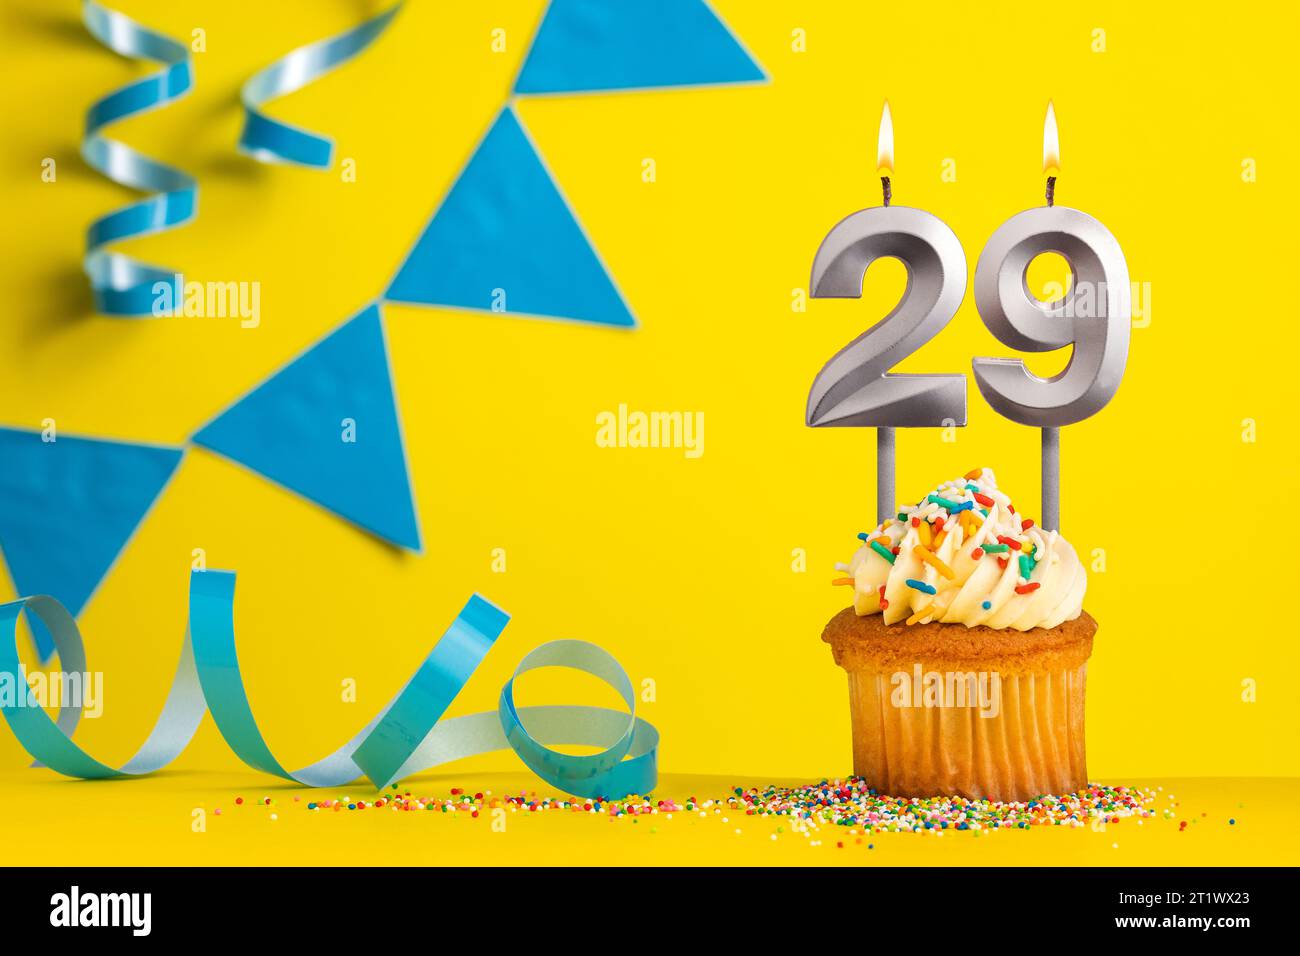 Birthday candle number 29 with cupcake - Yellow background with blue pennants Stock Photo